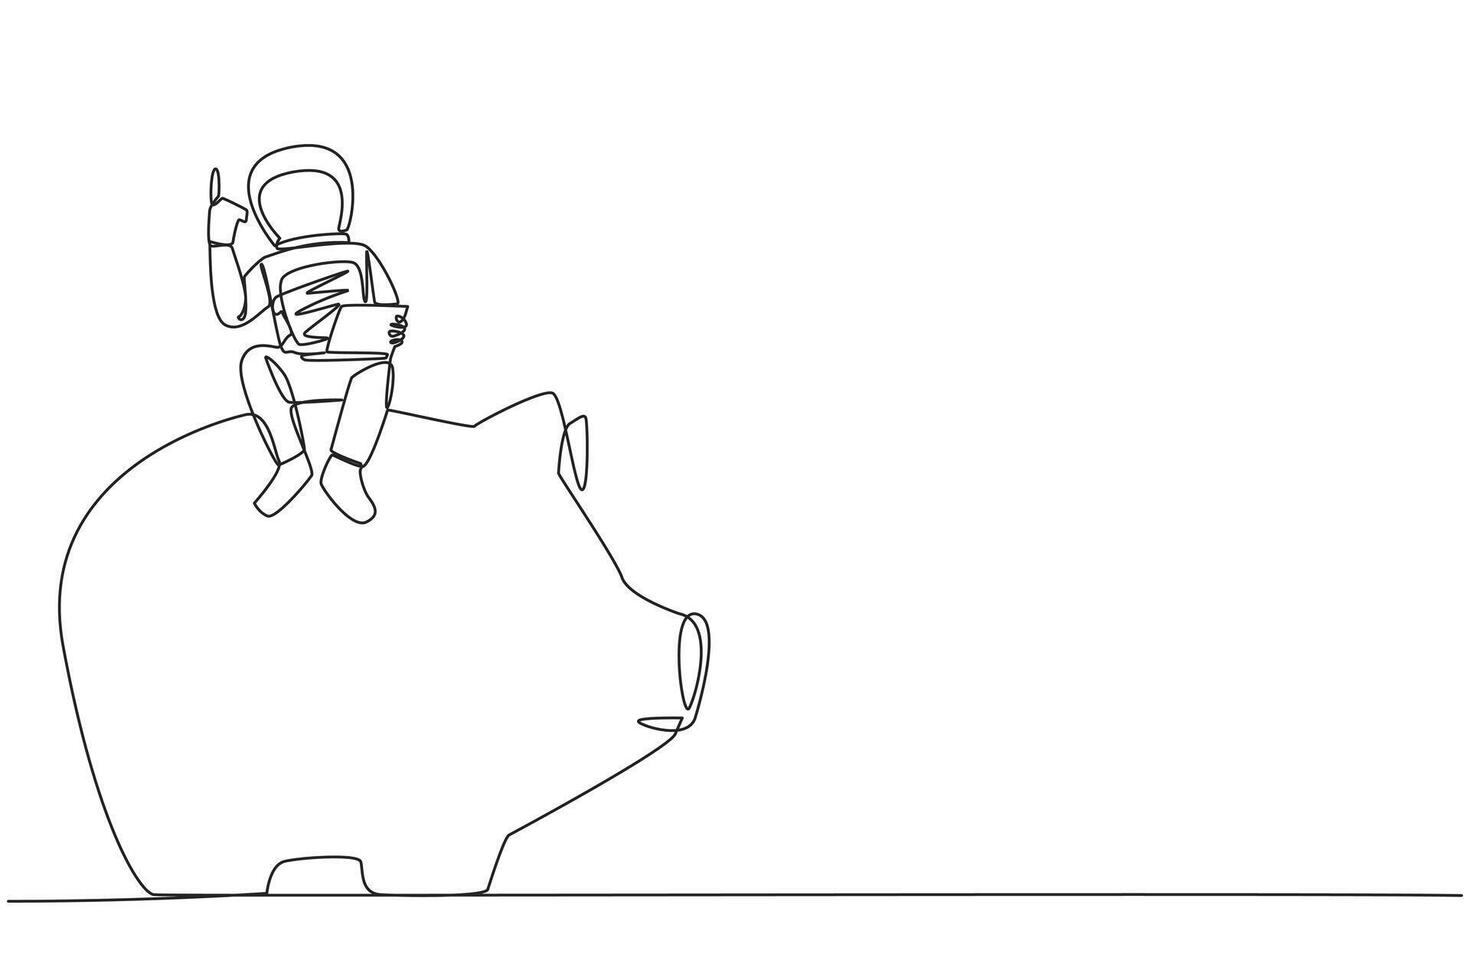 Single one line drawing young astronaut sitting on giant piggy bank holding laptop raise one hand. Saving up money for the next expedition. Galaxy cosmic. Continuous line design graphic illustration vector